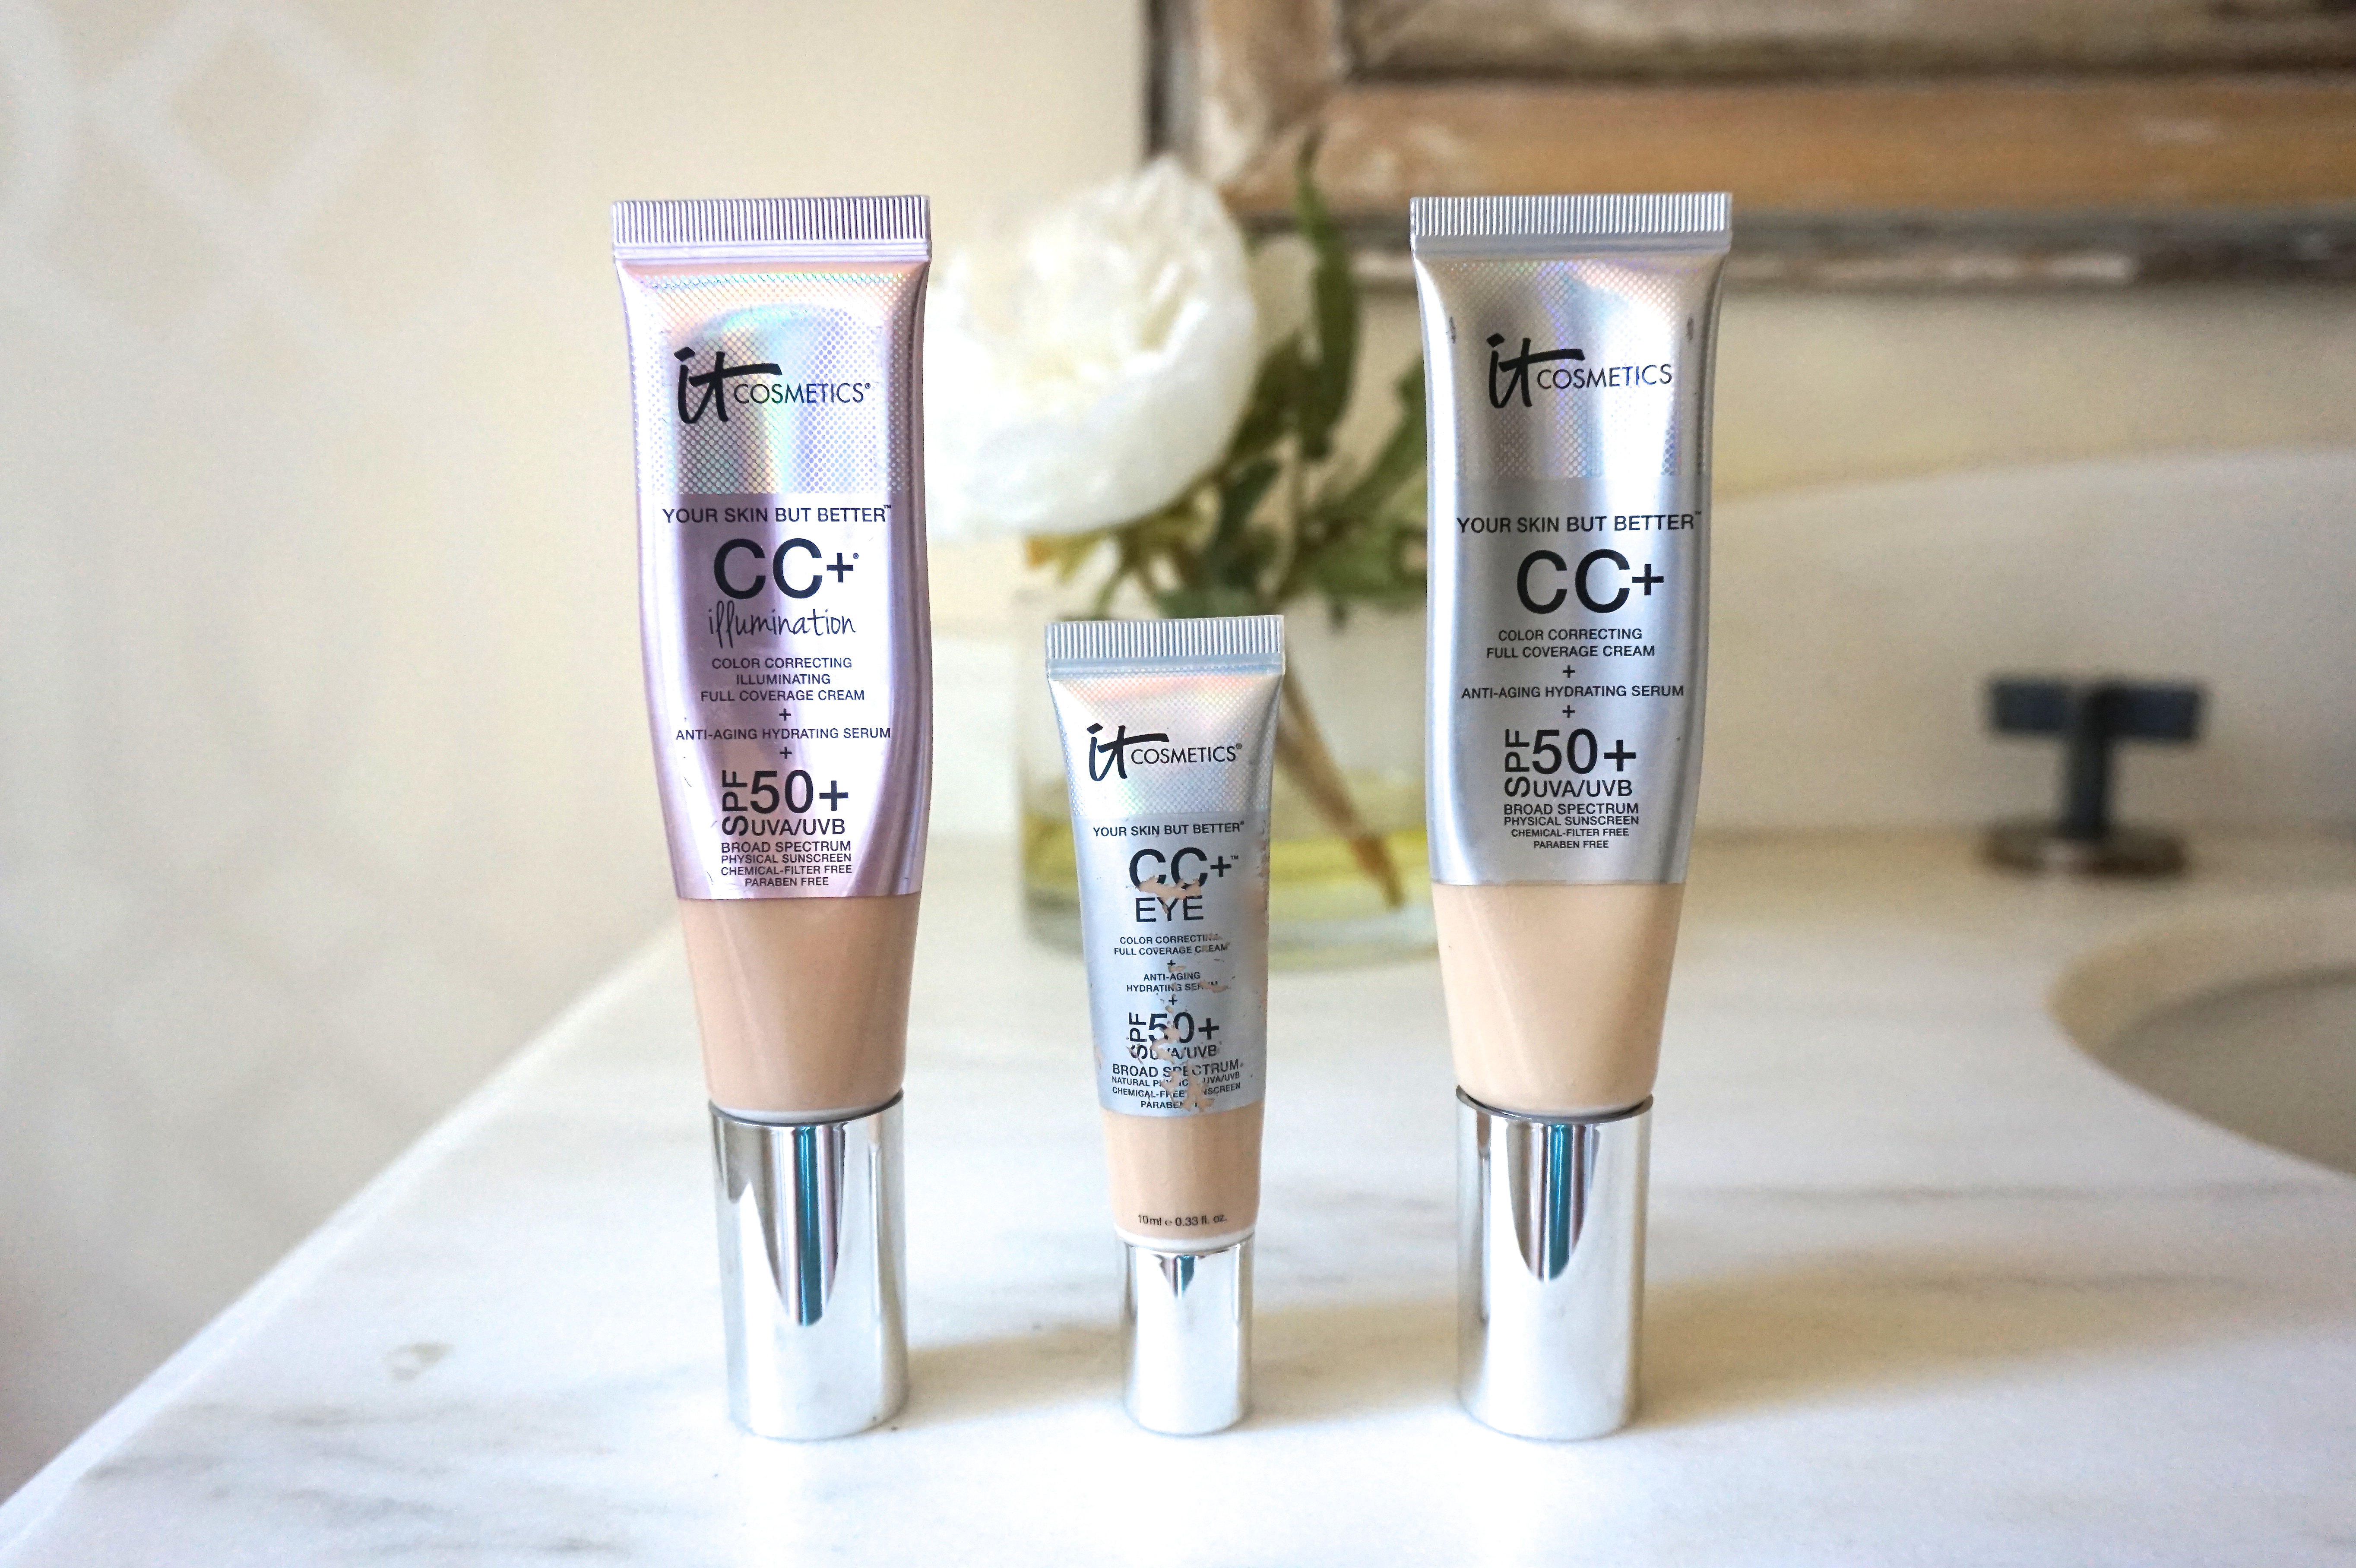 BB Cream vs. CC Cream: Here's the difference. Both offer makeup